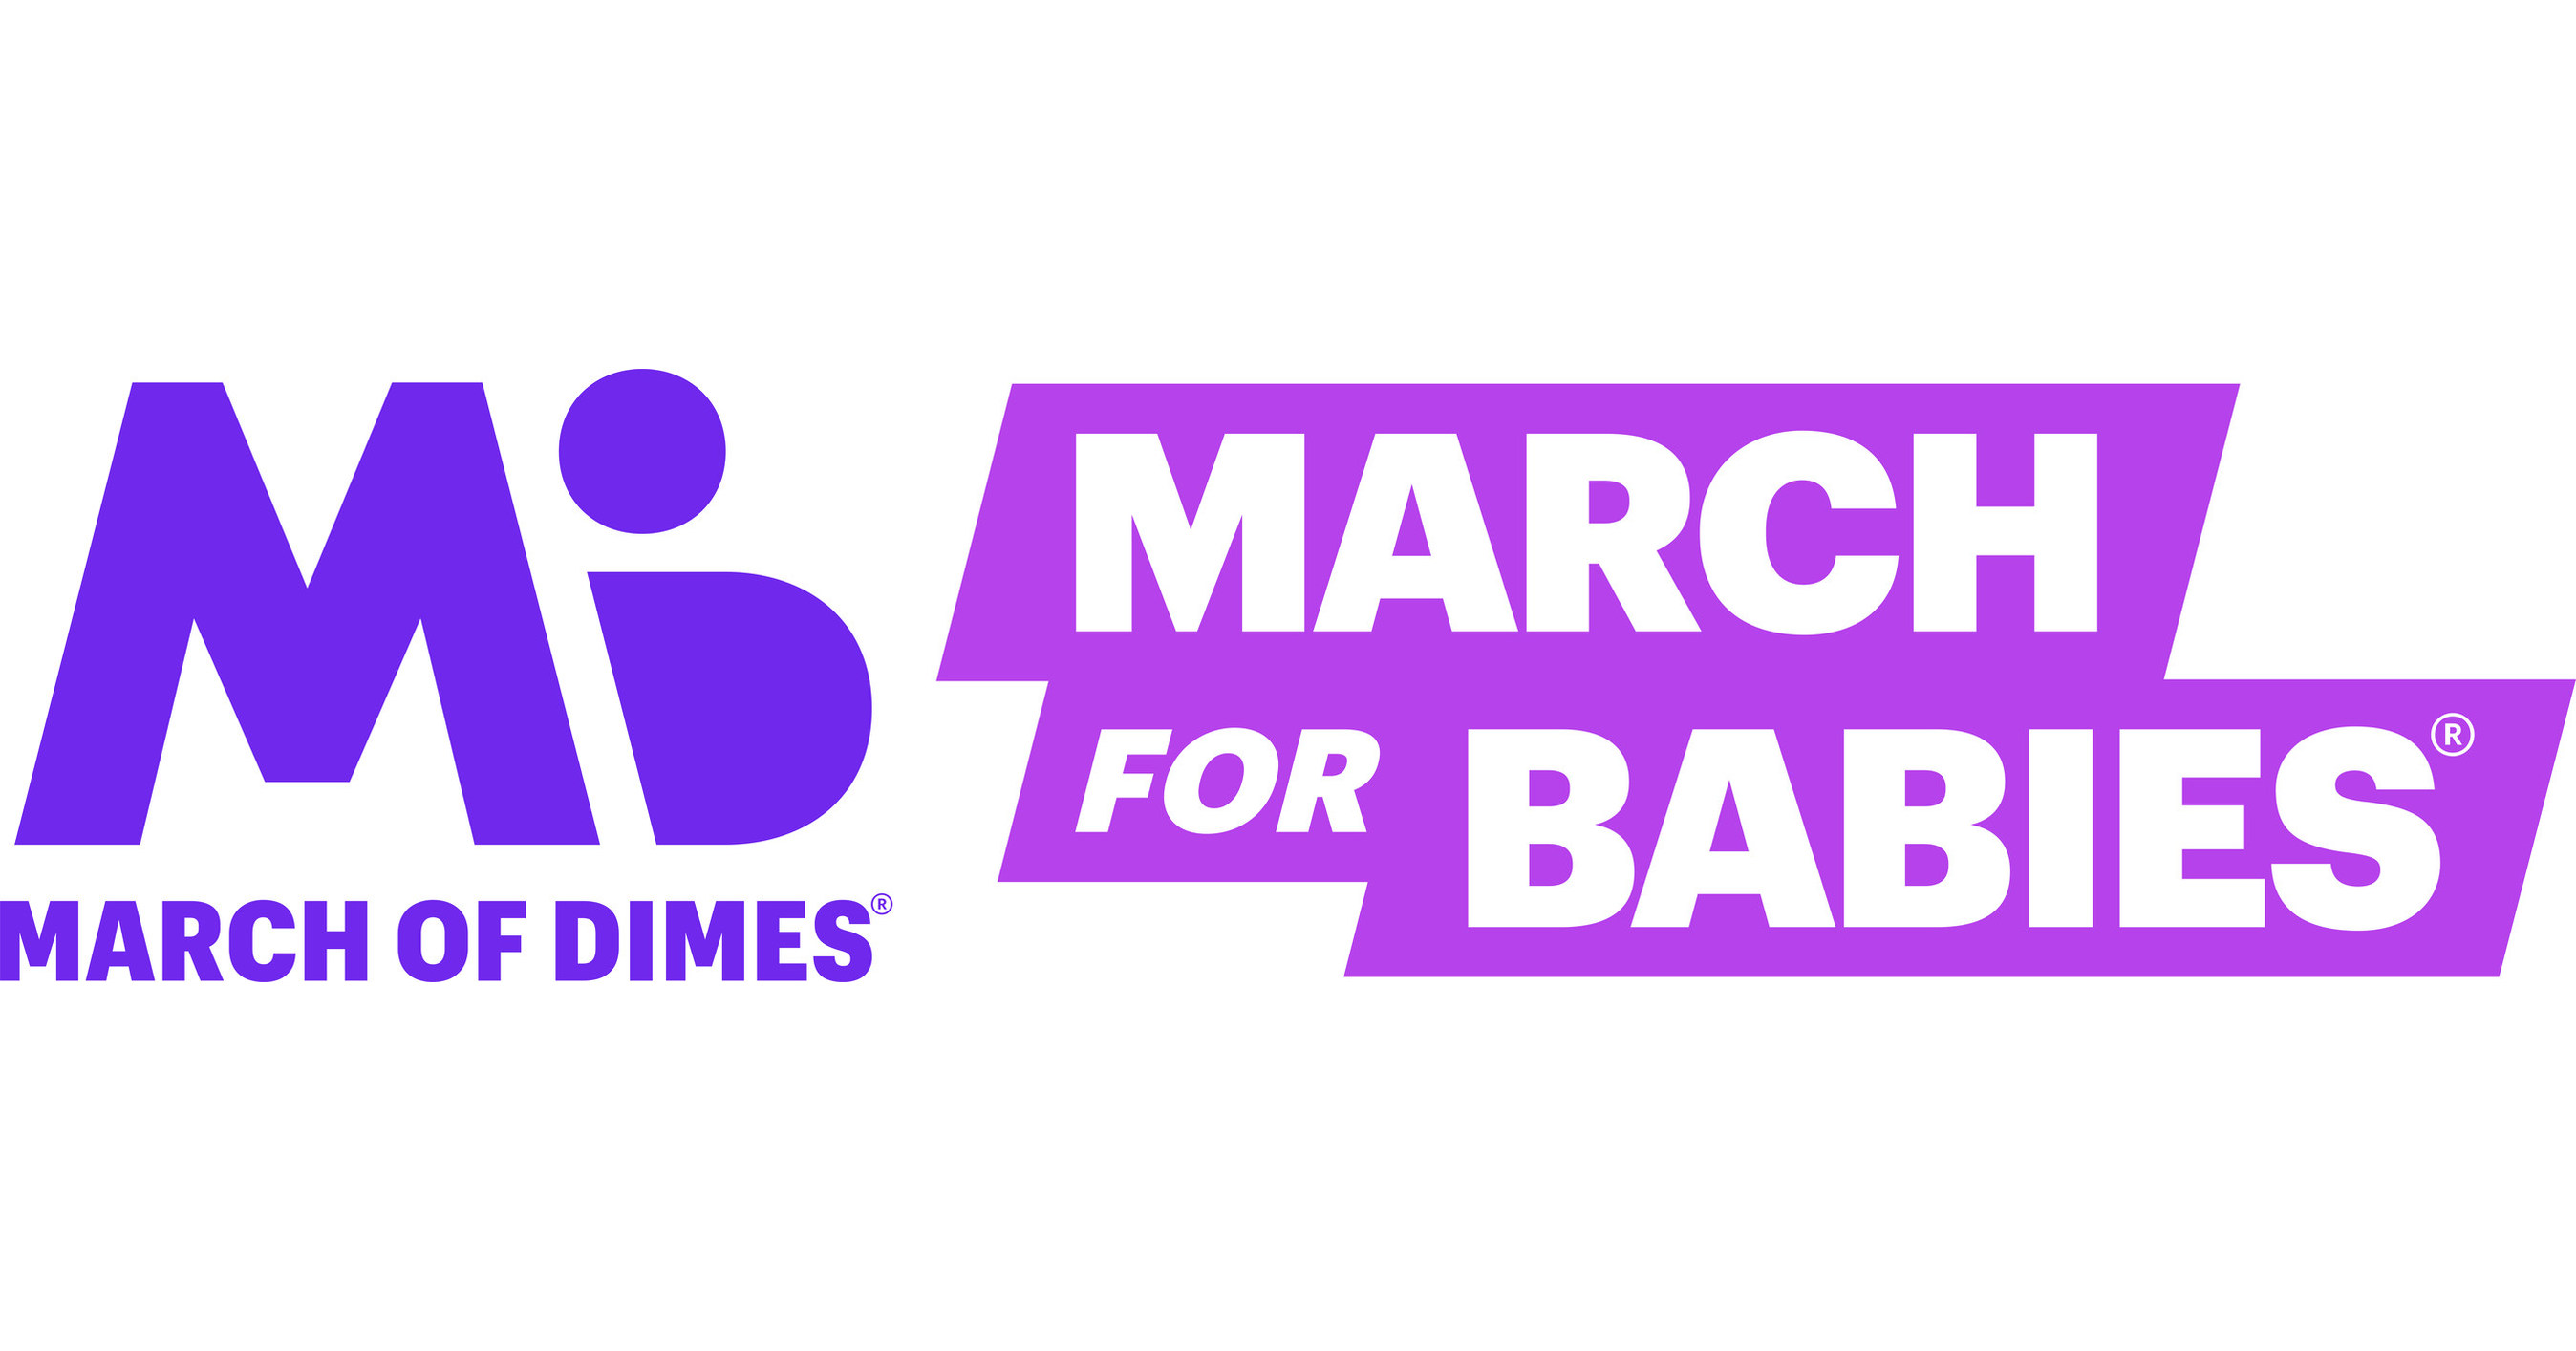 MARCH OF DIMES ANUNCIA MARCH FOR BABIES 2022 A MOTHER OF A MOVEMENT™